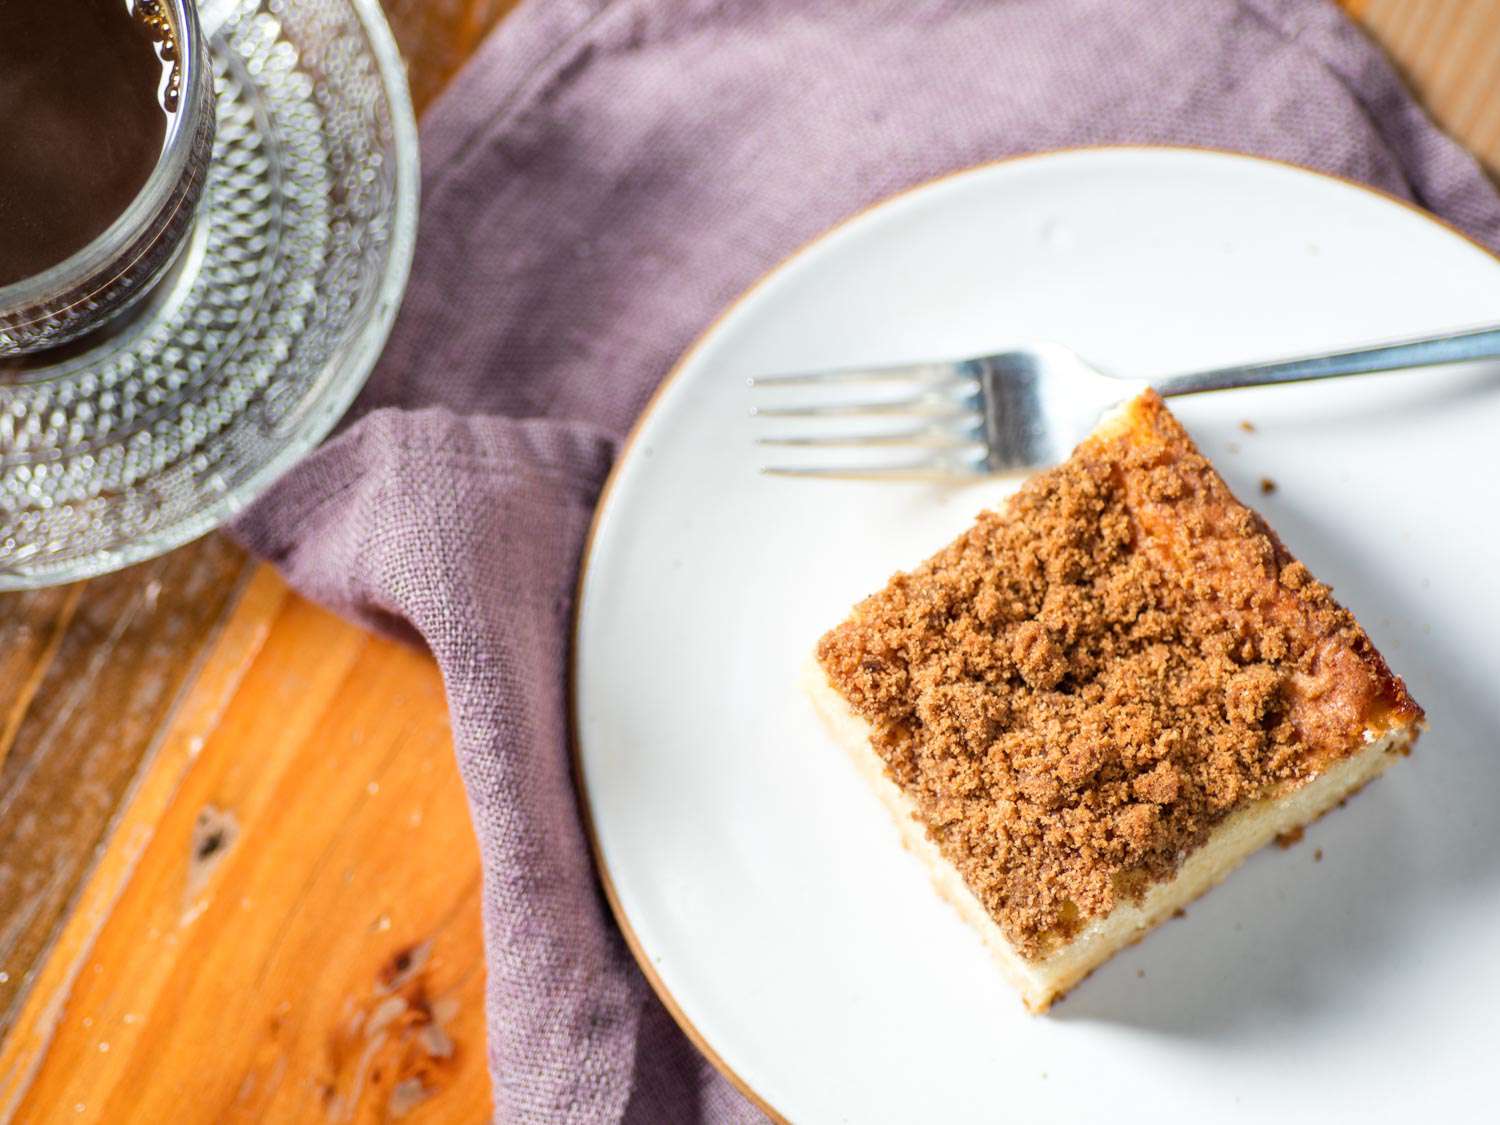 Overhead shot of a square of coffee cake plated with a fork.